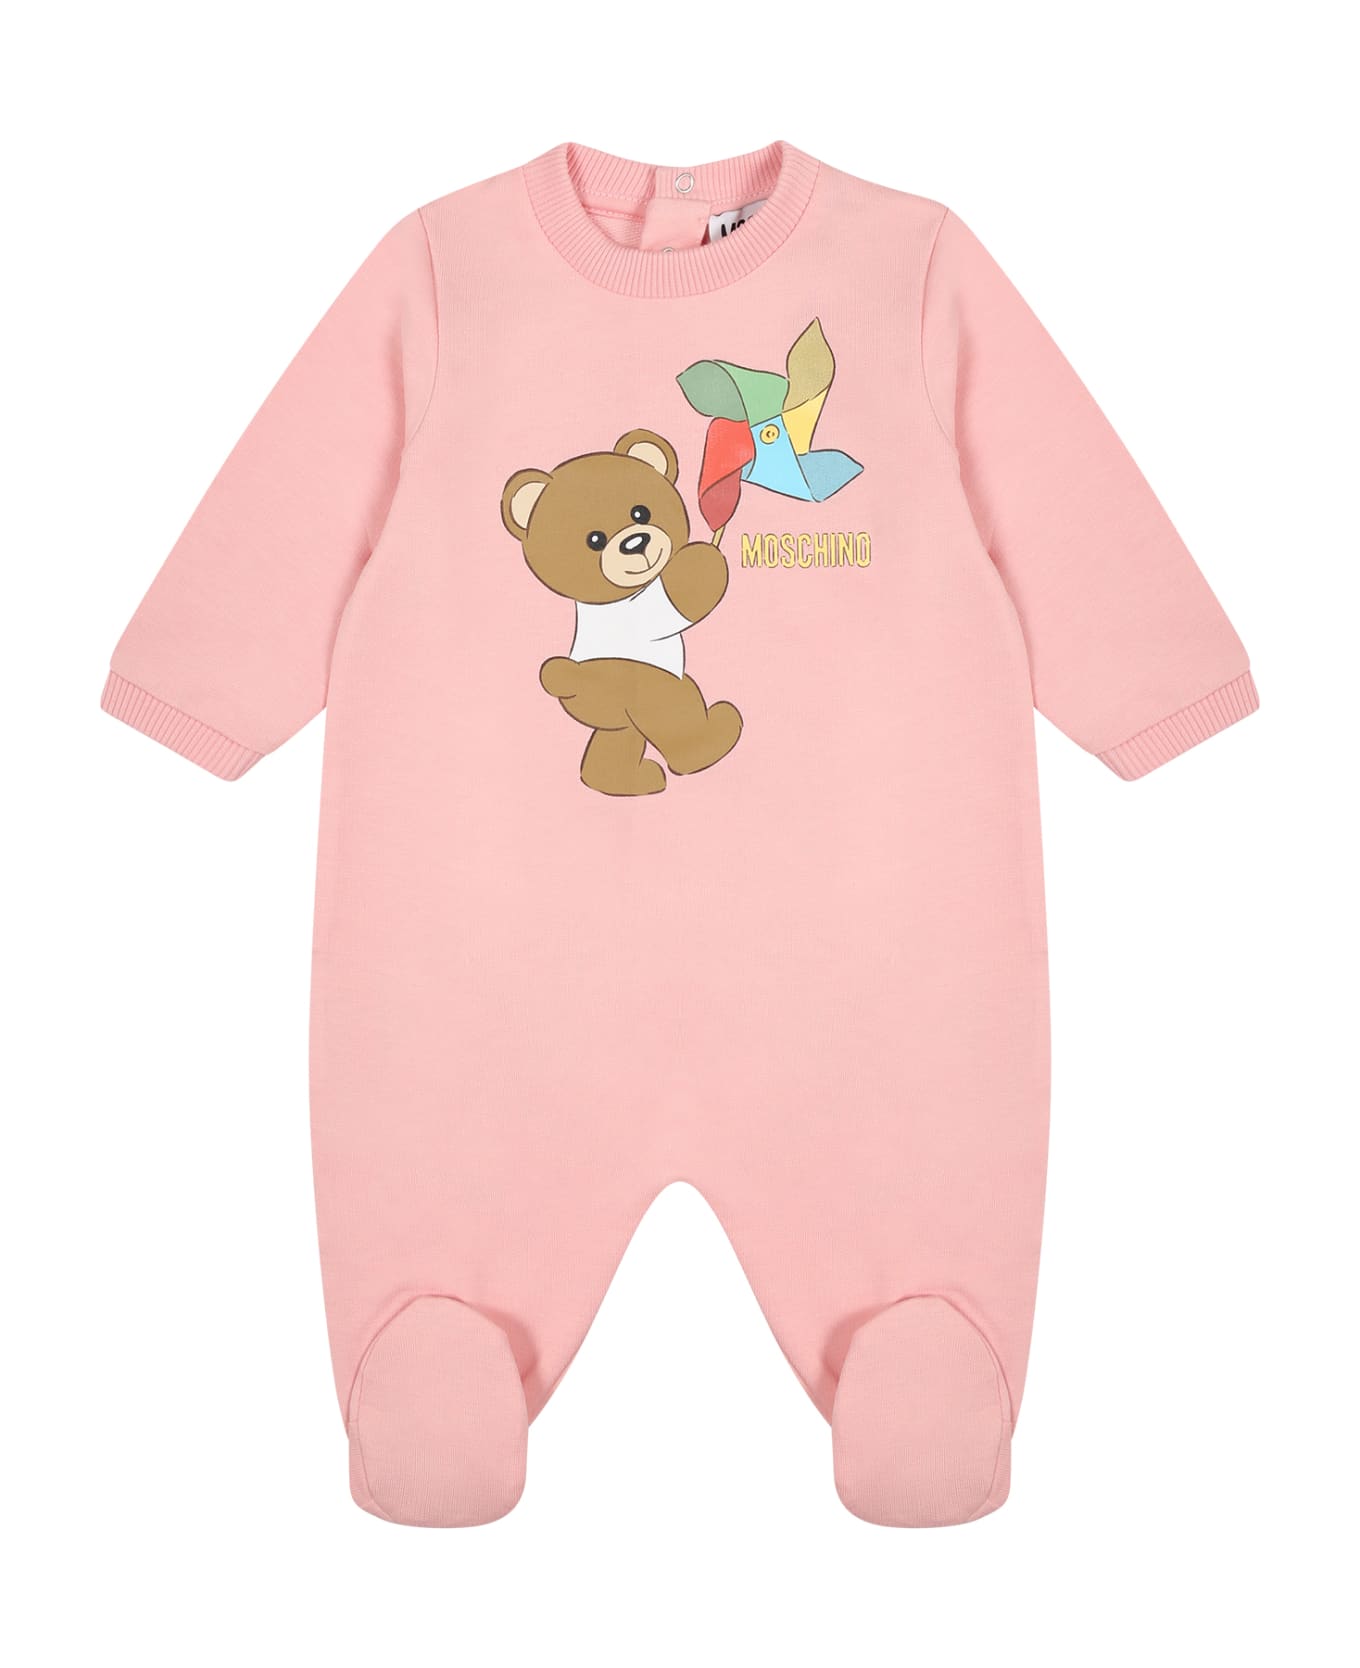 Moschino Pink Bodysuit For Baby Girl With Teddy Bear And Multicolor Pinwheel - Pink ボディスーツ＆セットアップ